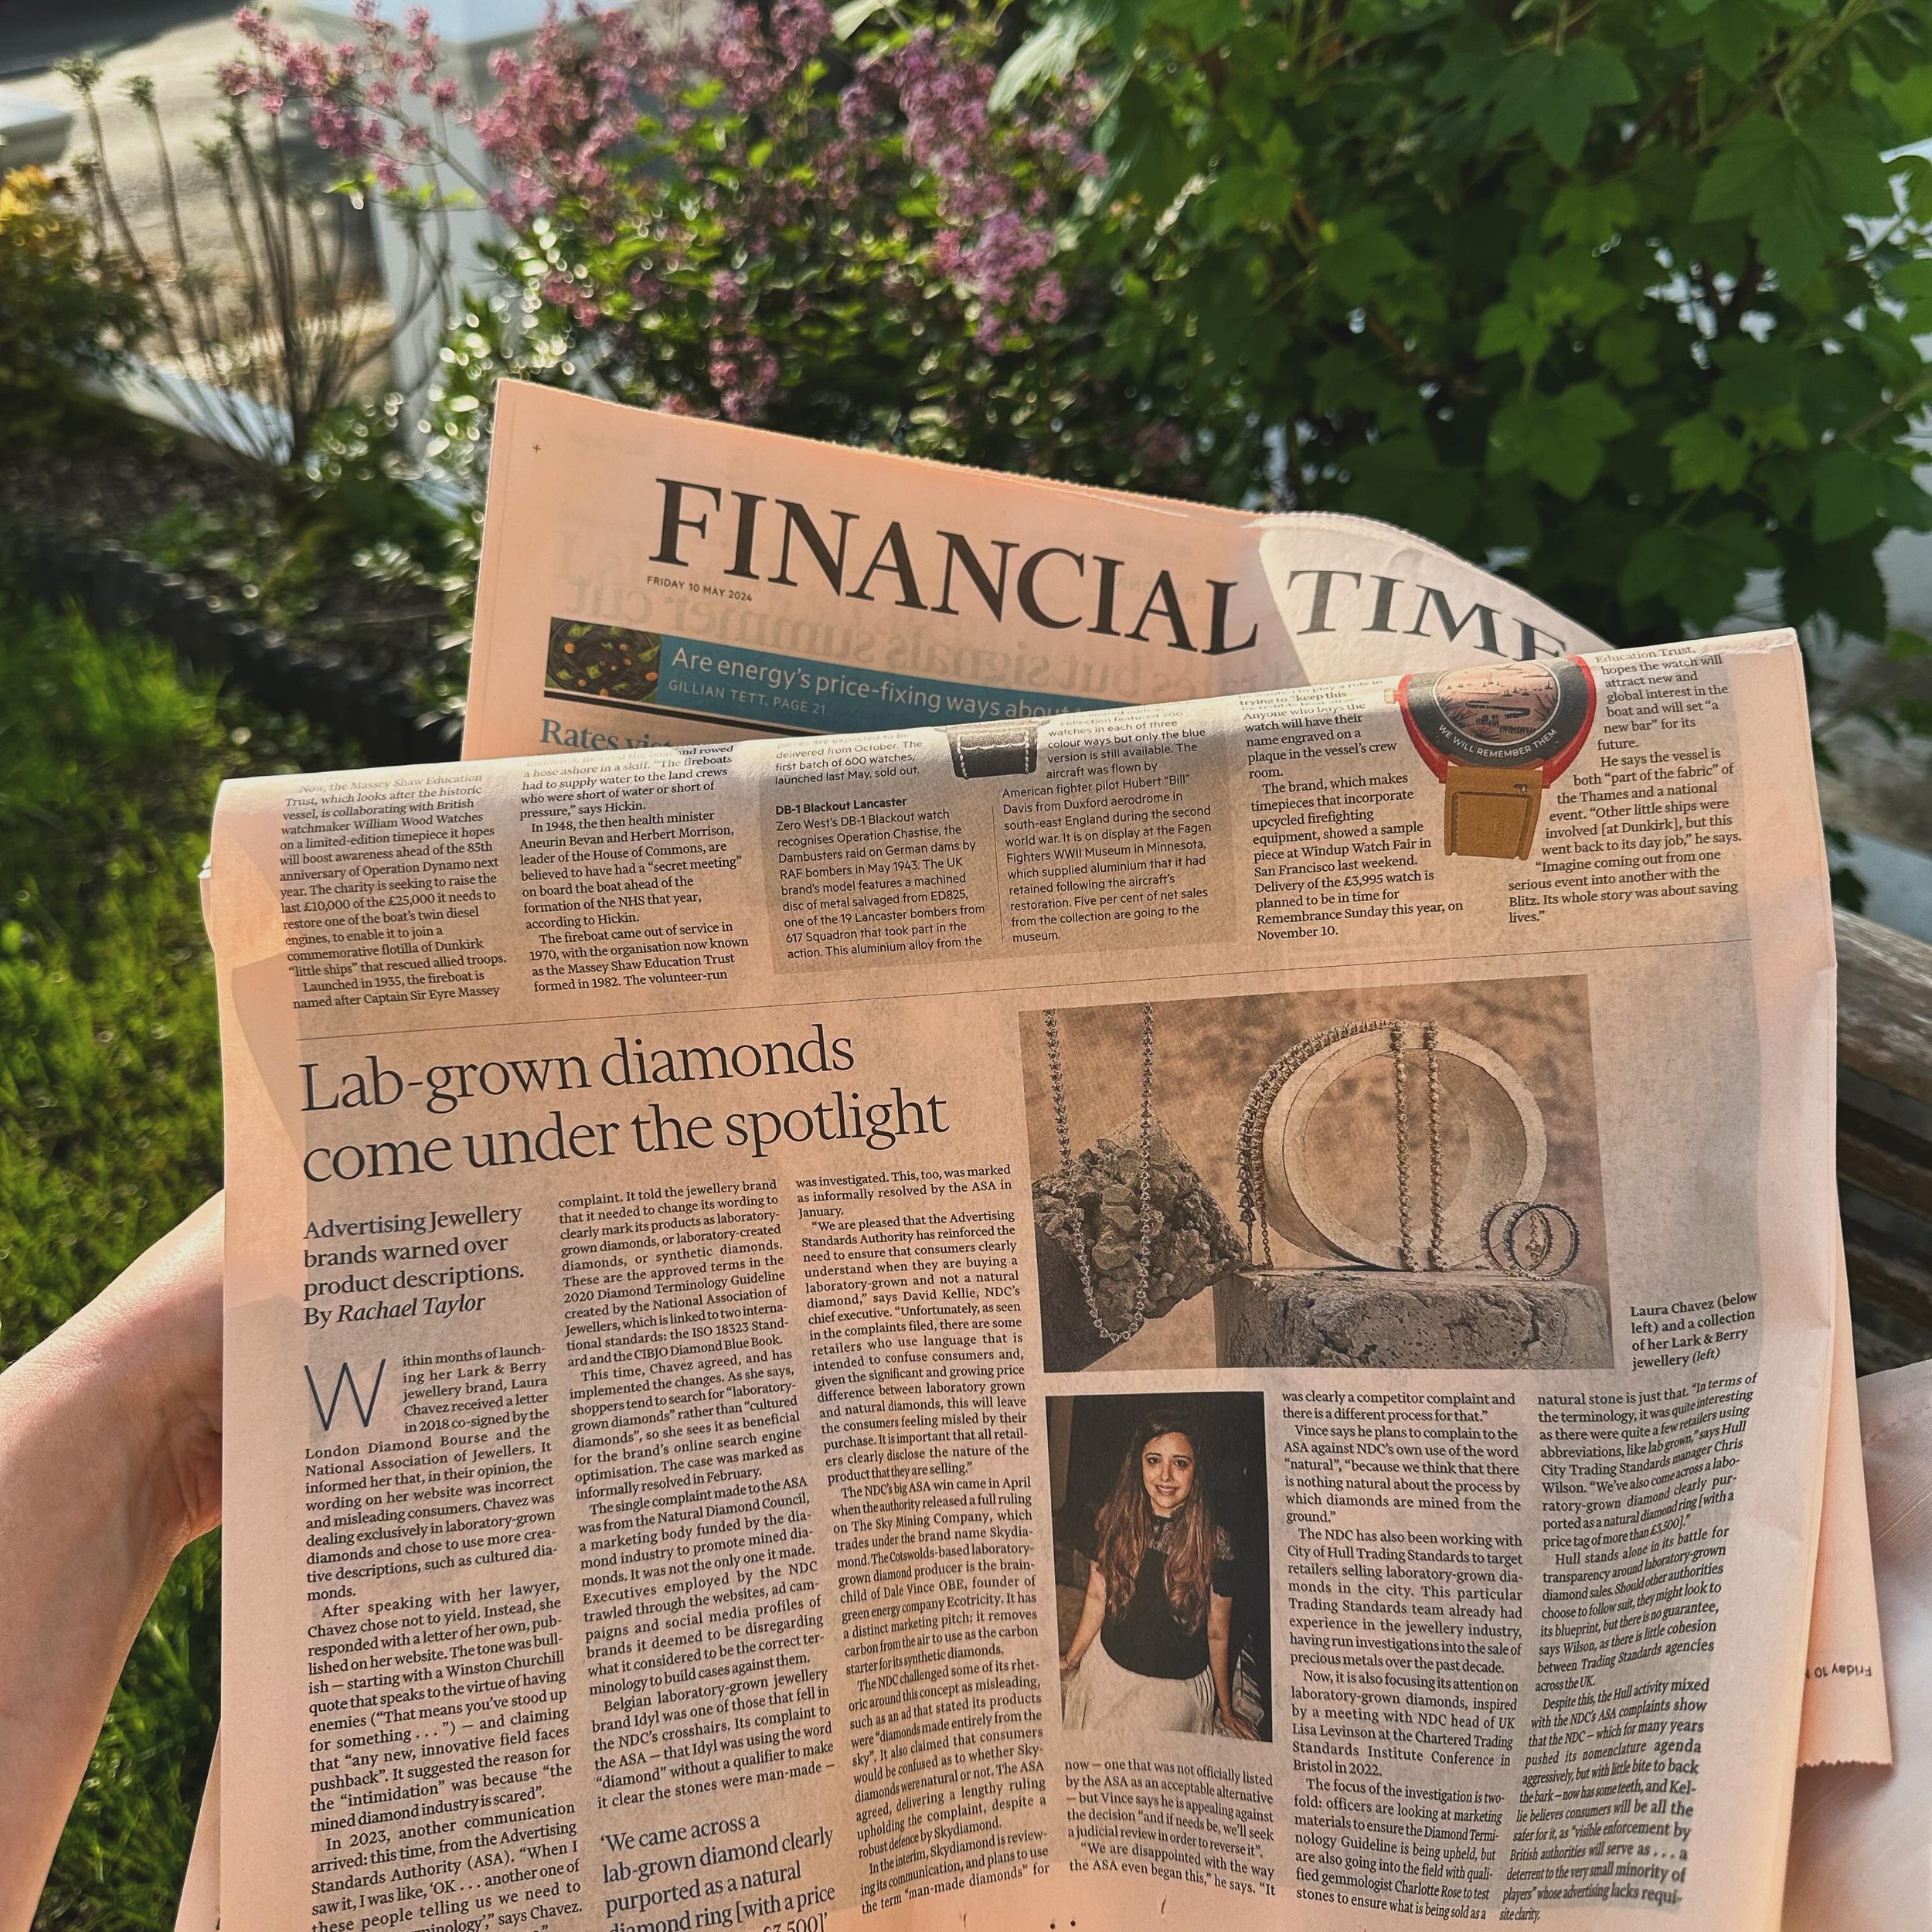 Writing about lab-grown diamond terminology in today&rsquo;s @financialtimes&hellip; or should I say laboratory-grown diamonds? Definitely not cultured diamonds, that&rsquo;s for sure 😉💎 

Industry bodies including @onlynaturaldiamonds and the @ukn